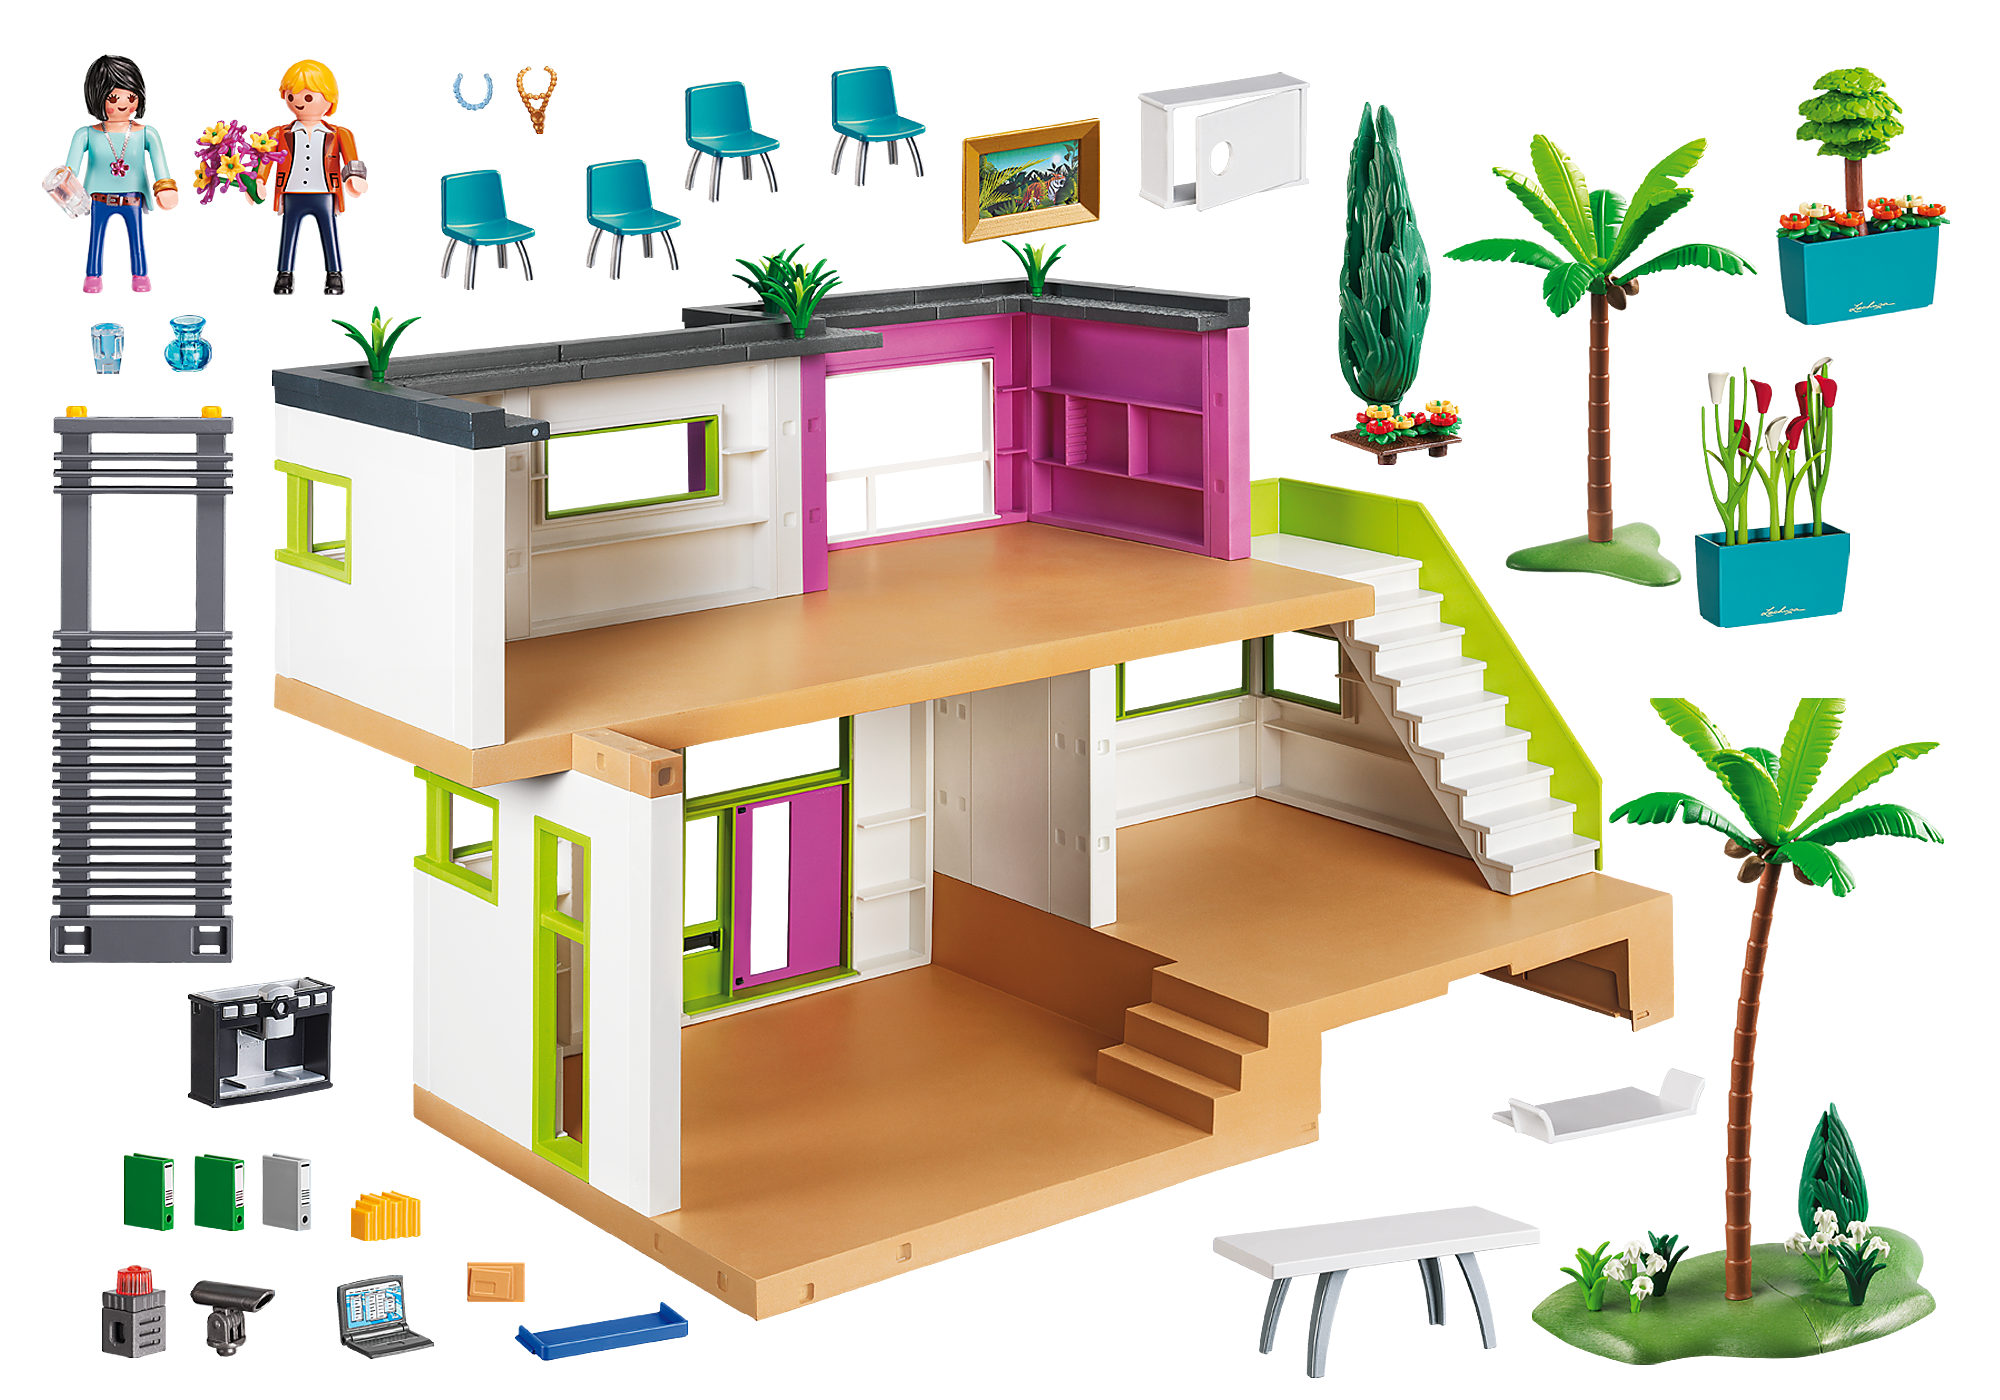 Playmobil unboxing : Modern luxury mansion (2014) - 5574, 5575